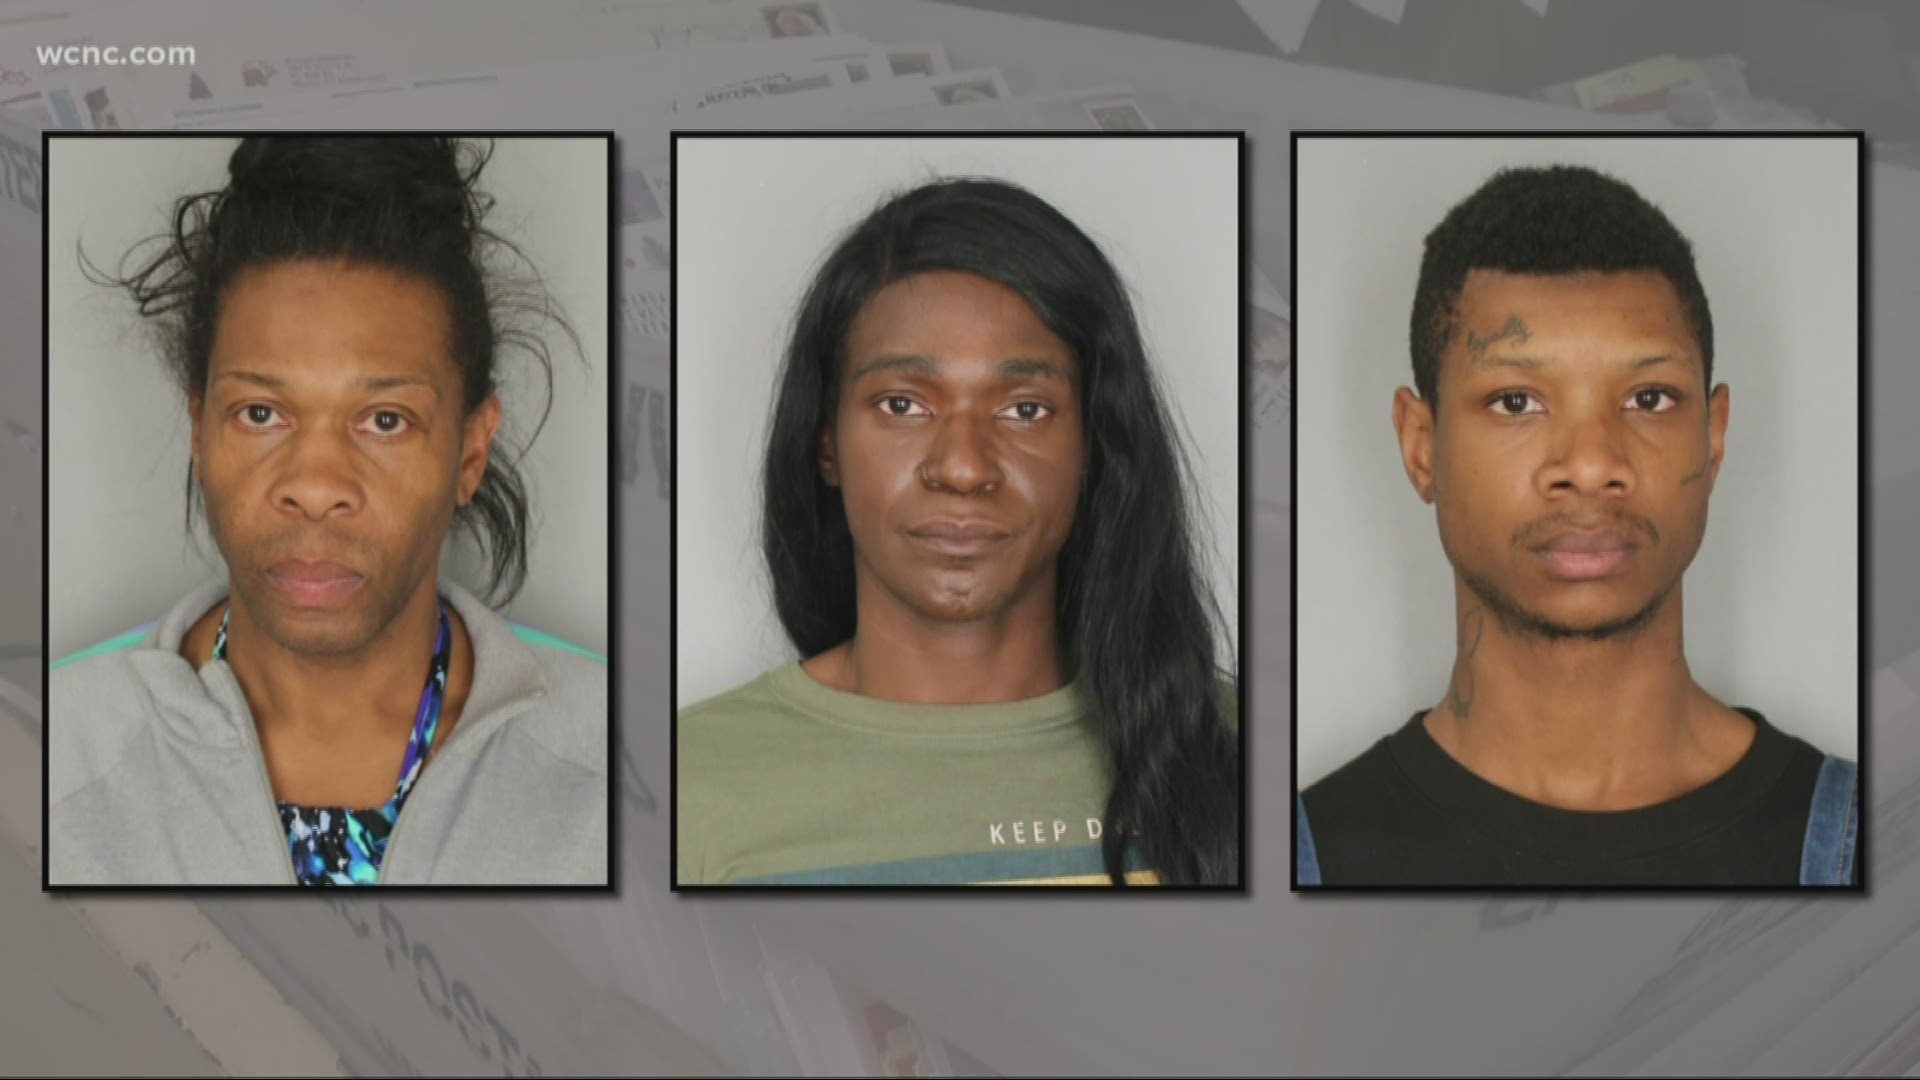 Three suspects were arrested after police found stolen mail in their hotel room. Detectives said the suspects used the mail to steal personal information.